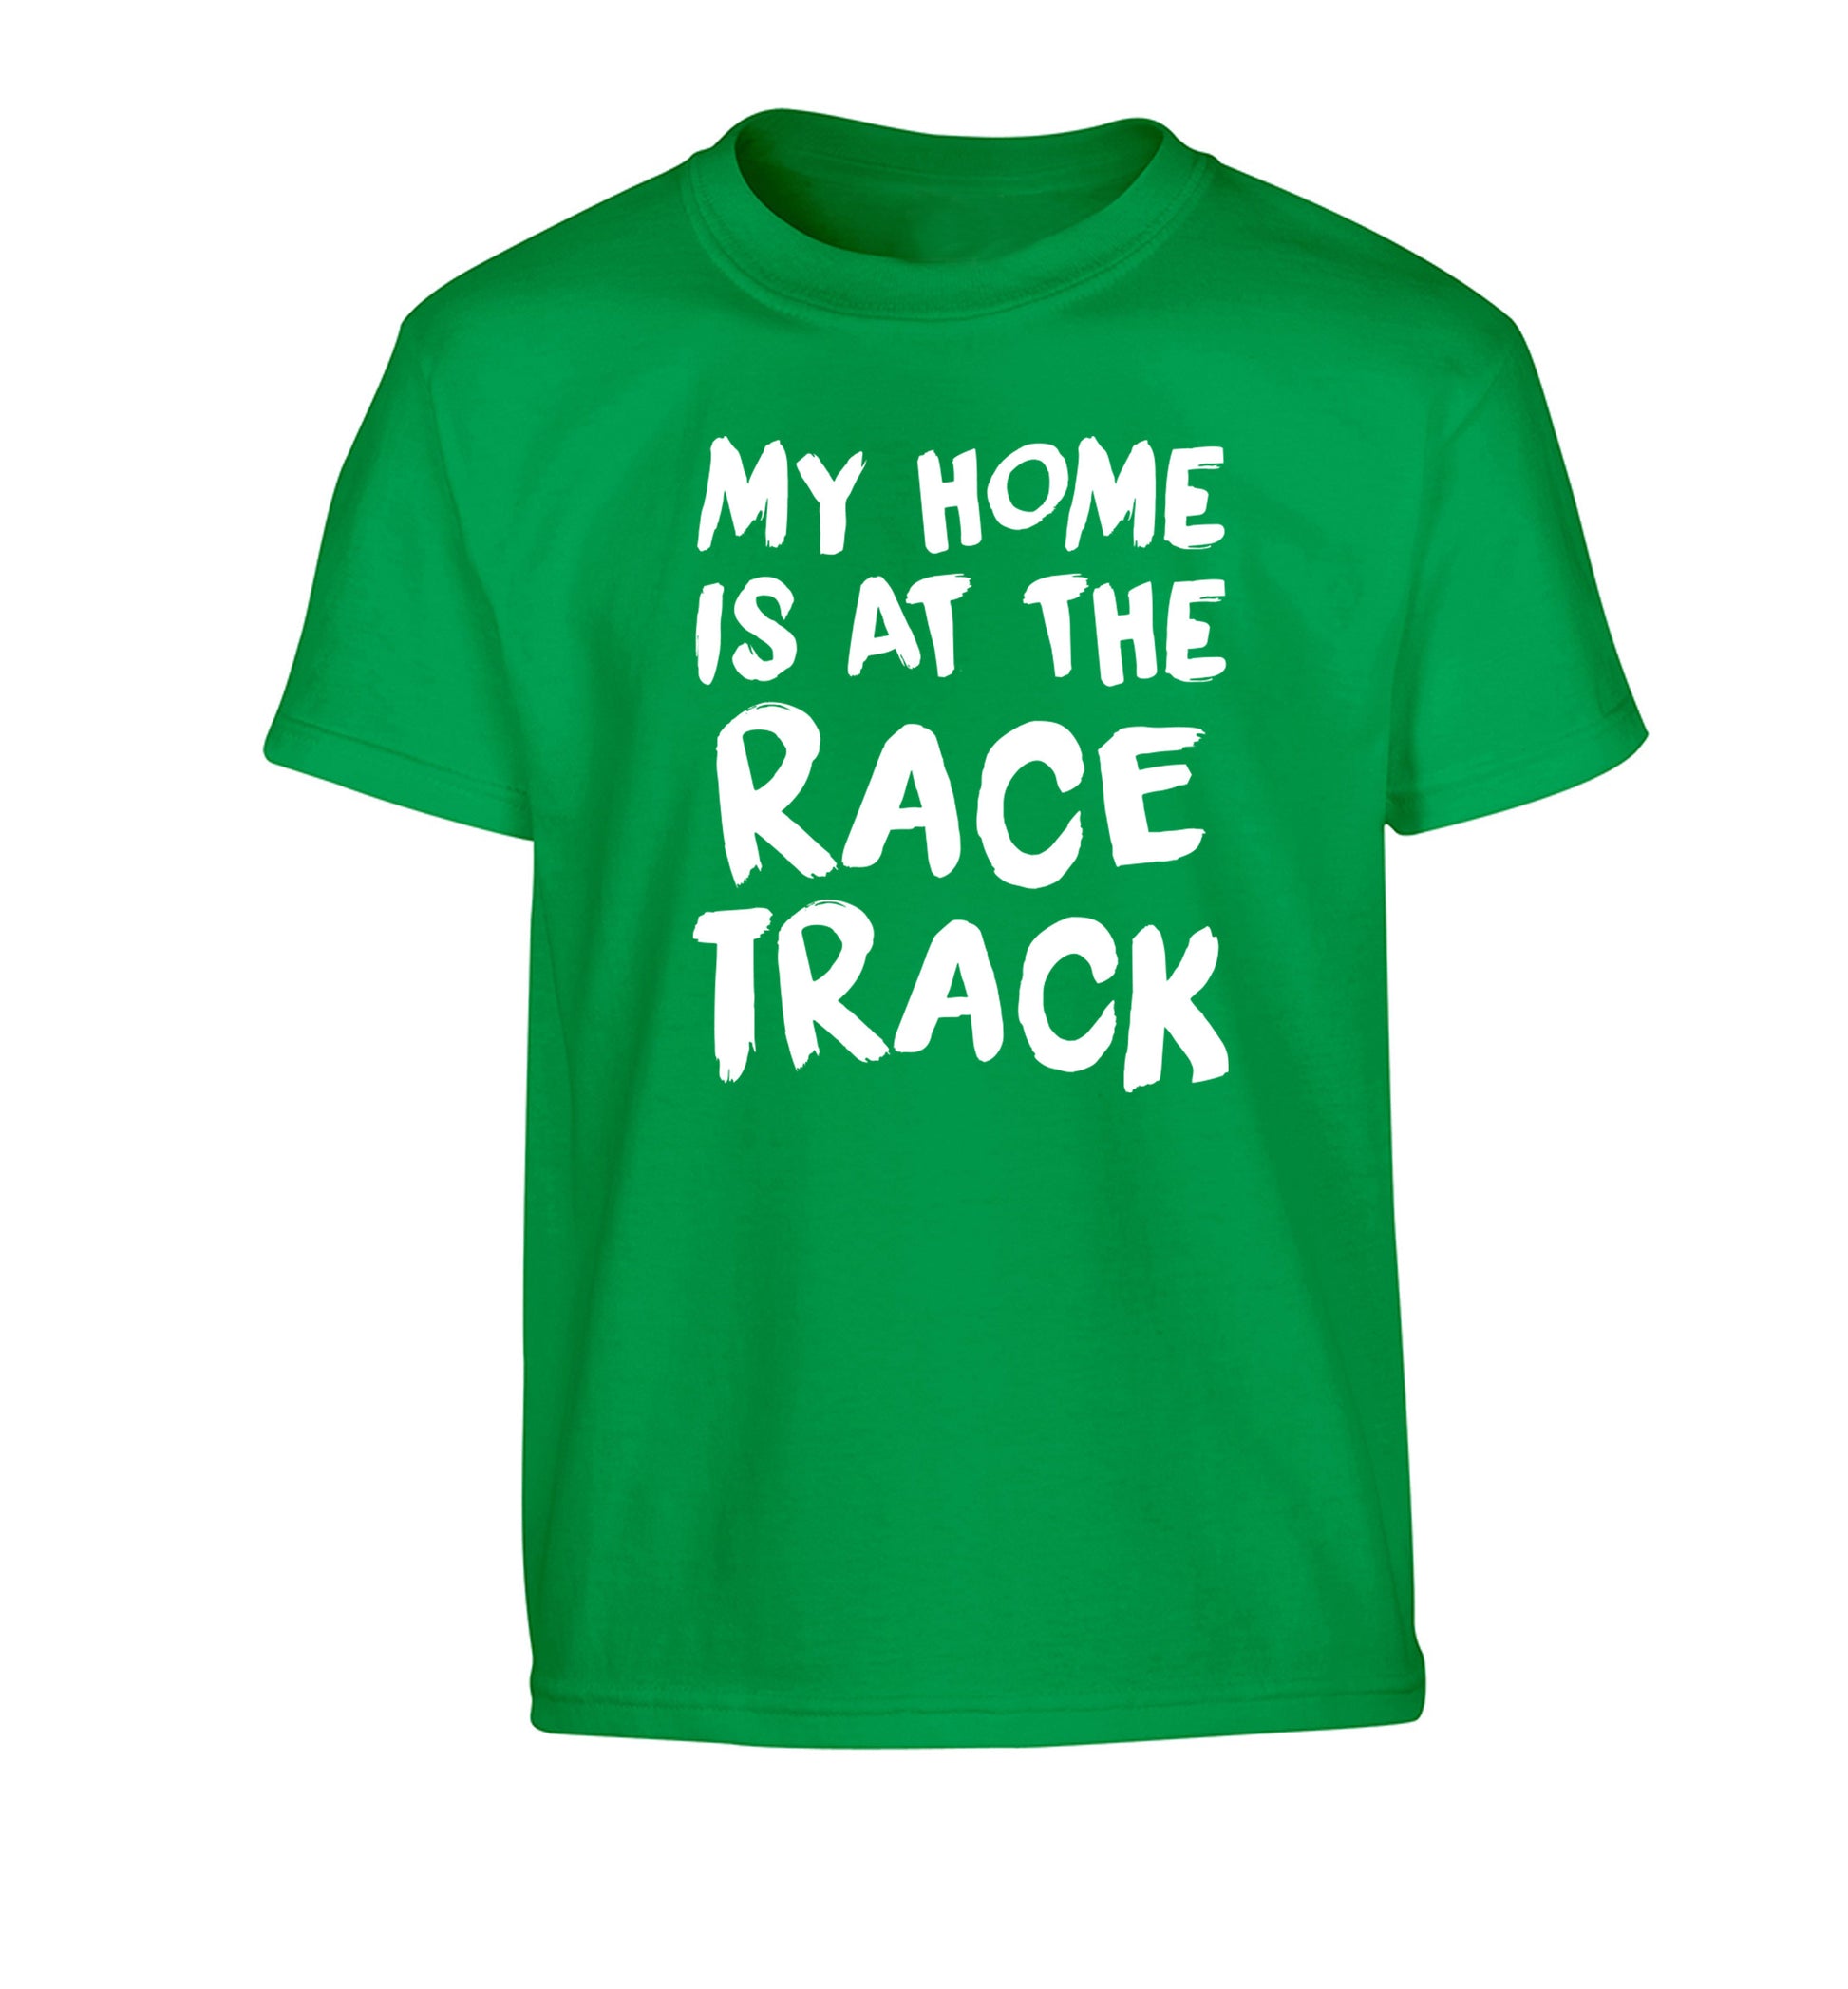 My home is at the race track Children's green Tshirt 12-14 Years